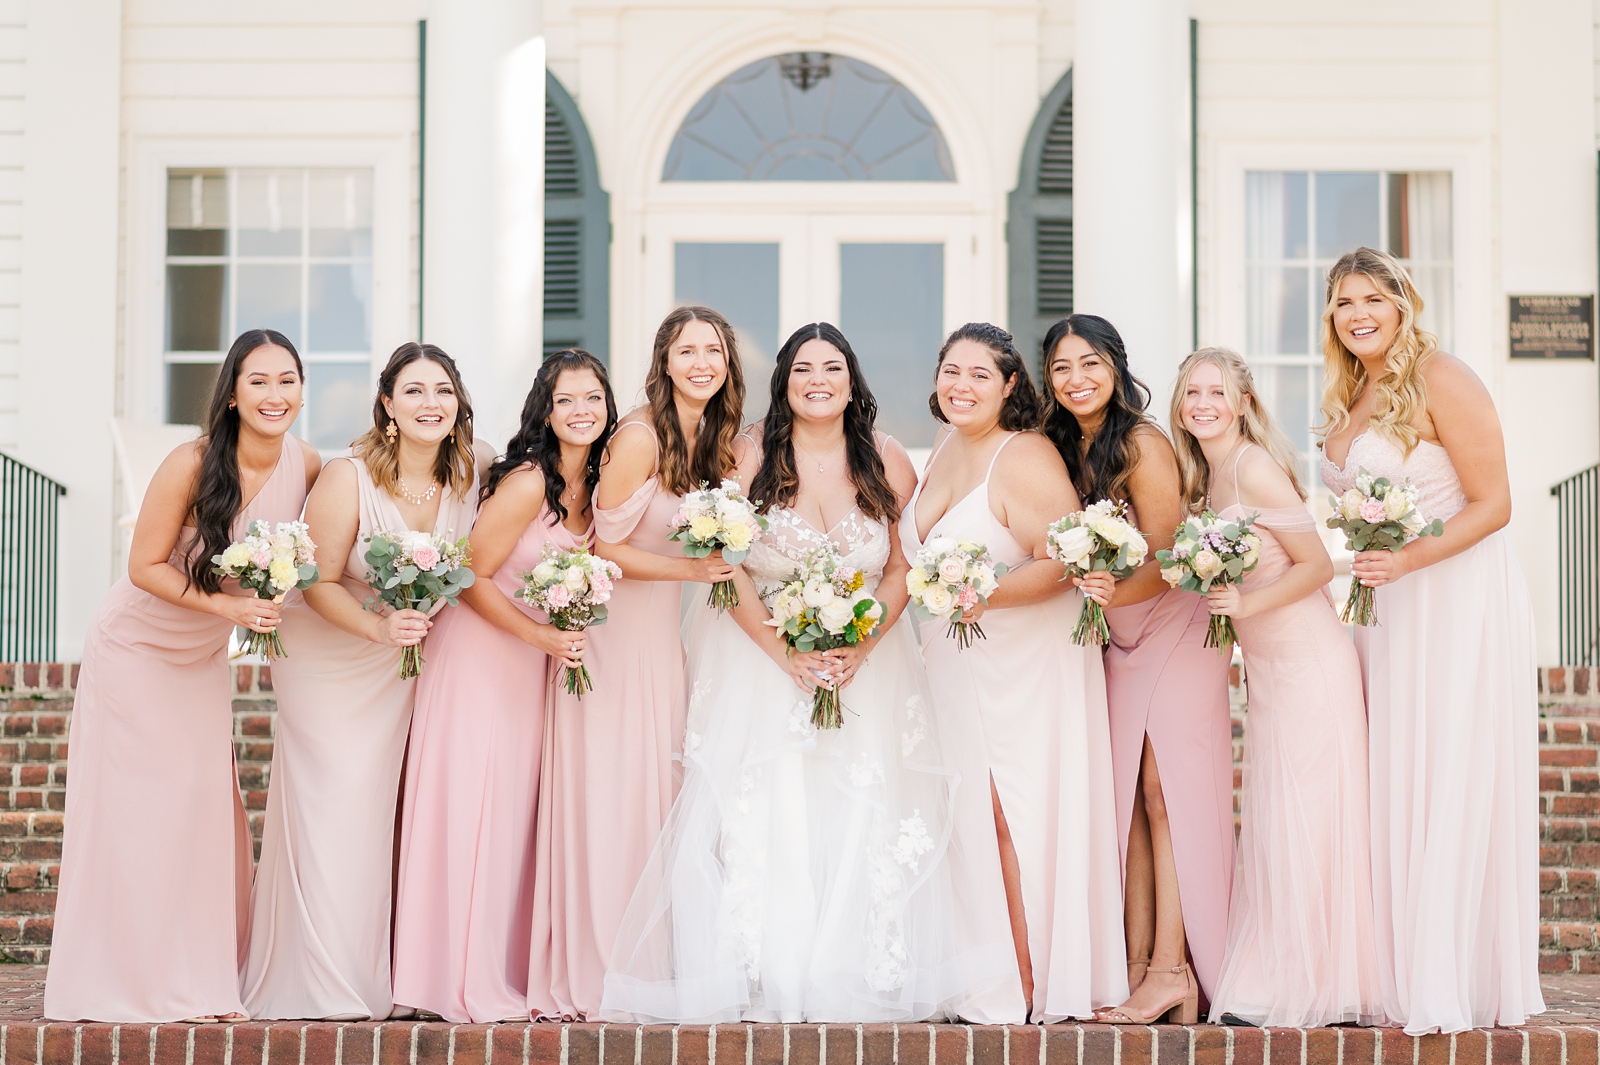 Bride and Bridesmaid Portraits at a Cumberland Estate Wedding with Pink Bridesmaid Dresses. Photography by New Kent Wedding Photographer Kailey Brianne Photography. 